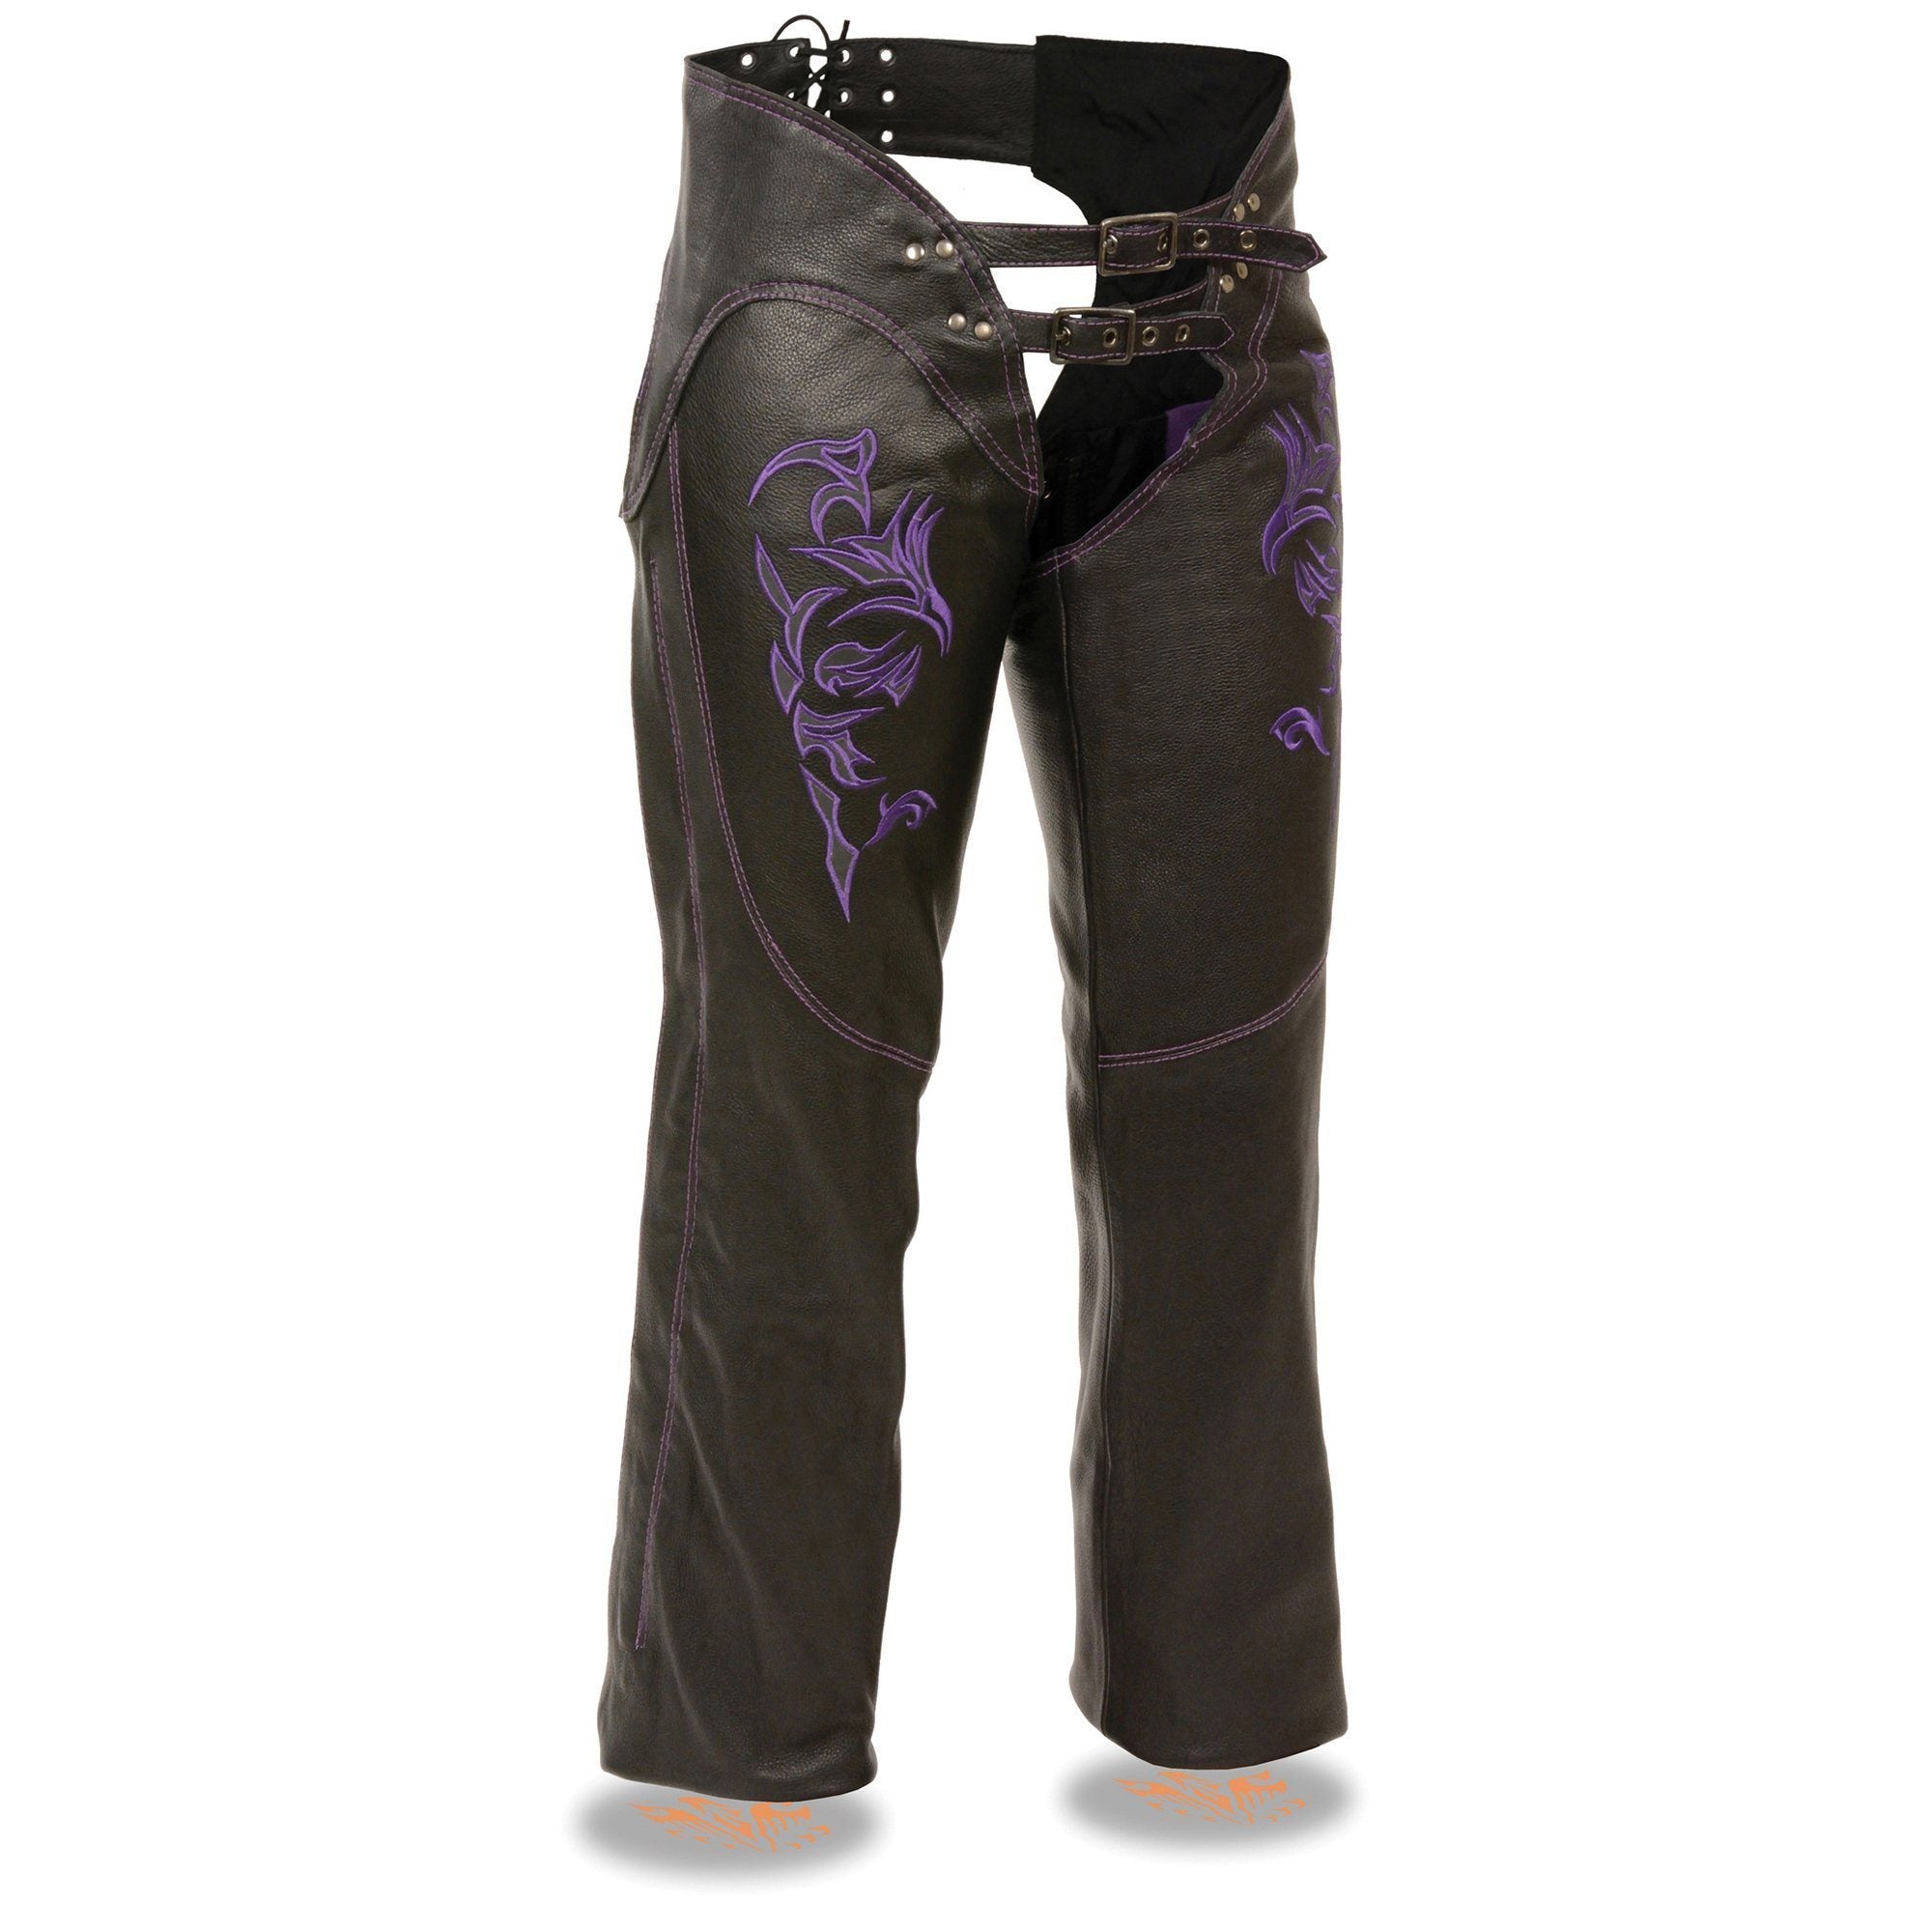 Image of Milwaukee Leather Chaps for Women Black and Purple Low-Rise Waist- Double Buckle Reflective Embroidery Motorcycle Chap- ML1187